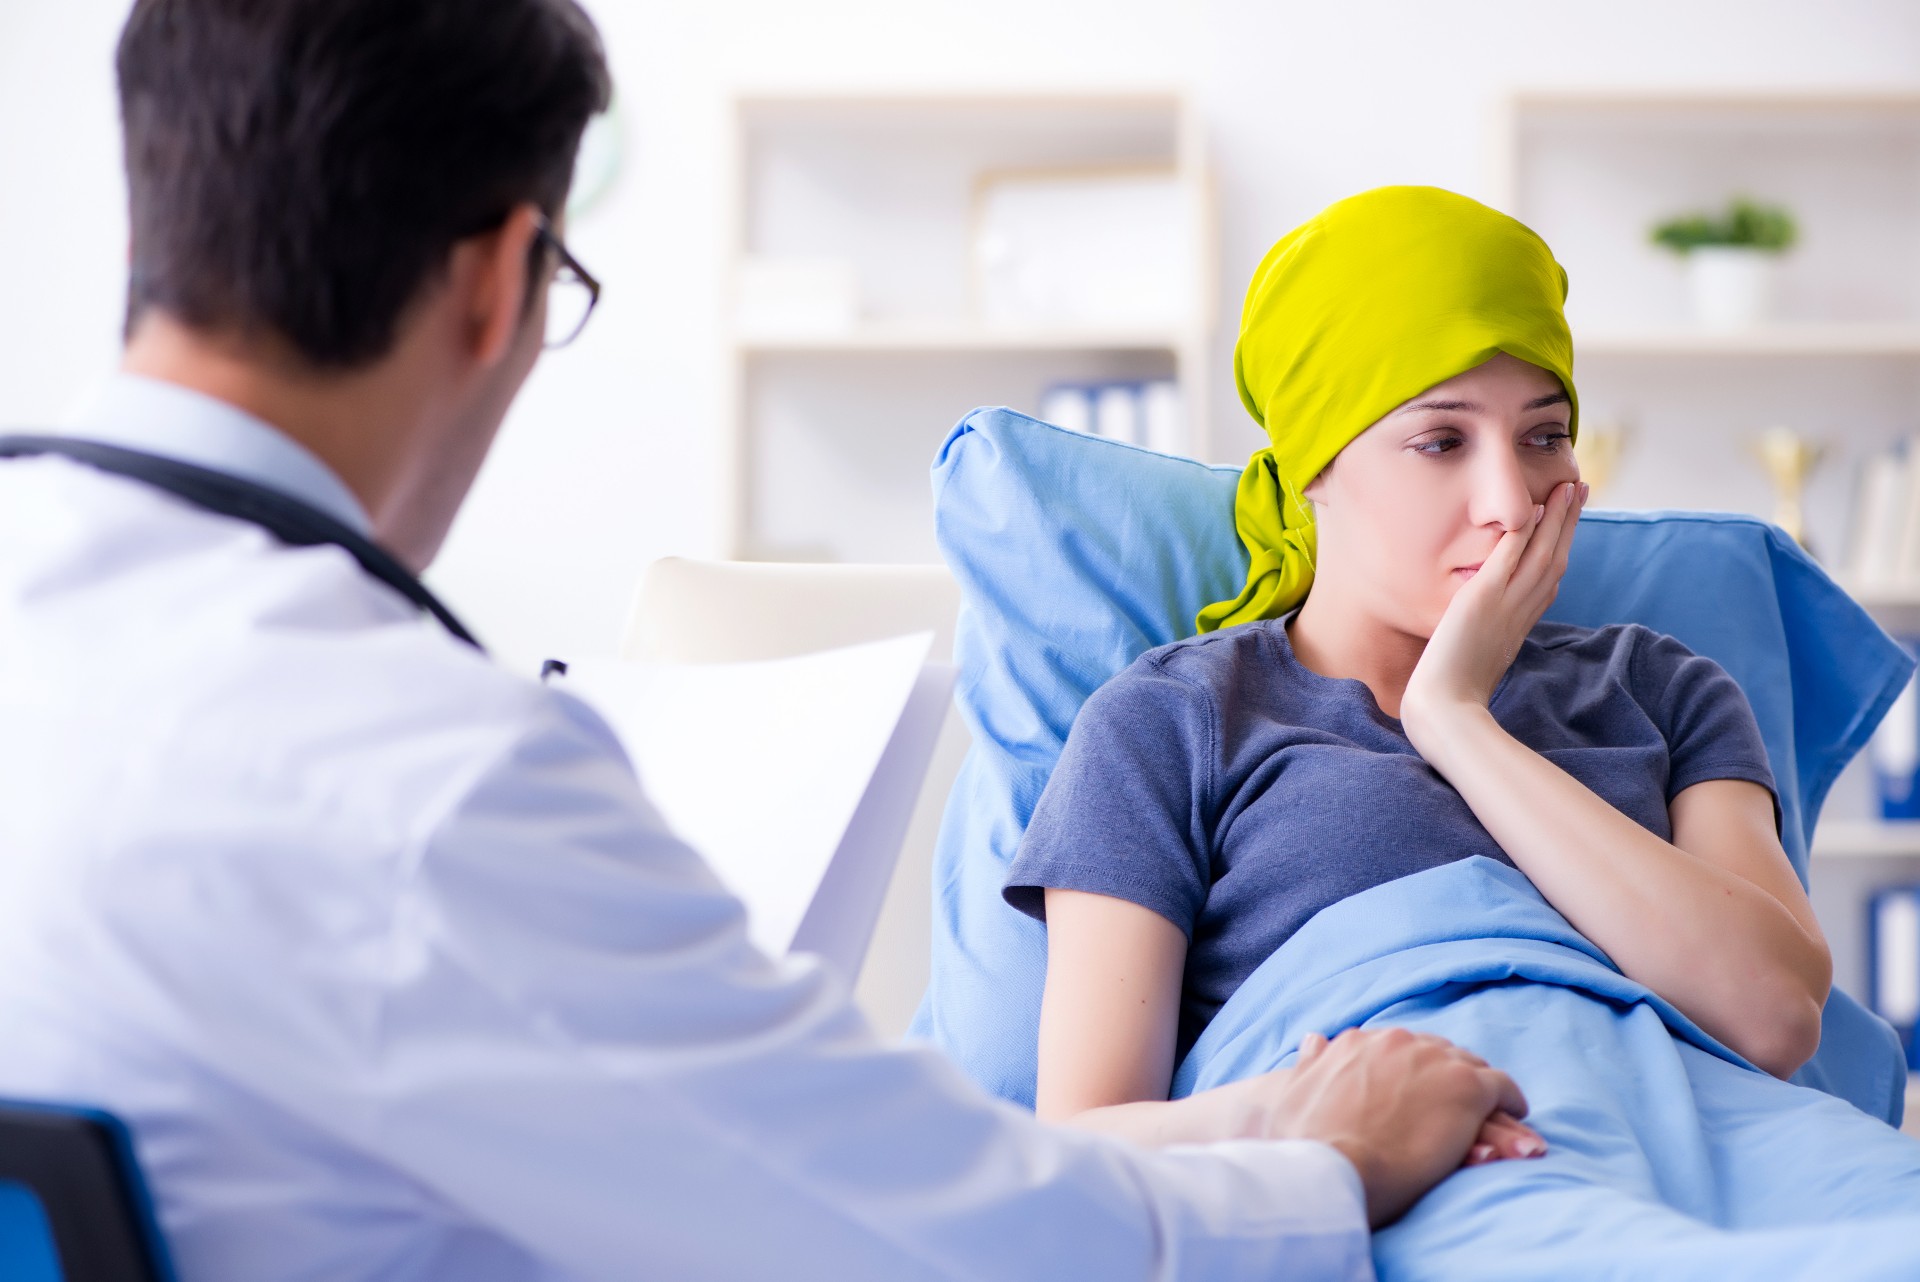 Cancer patient visiting doctor for medical consultation in clinic